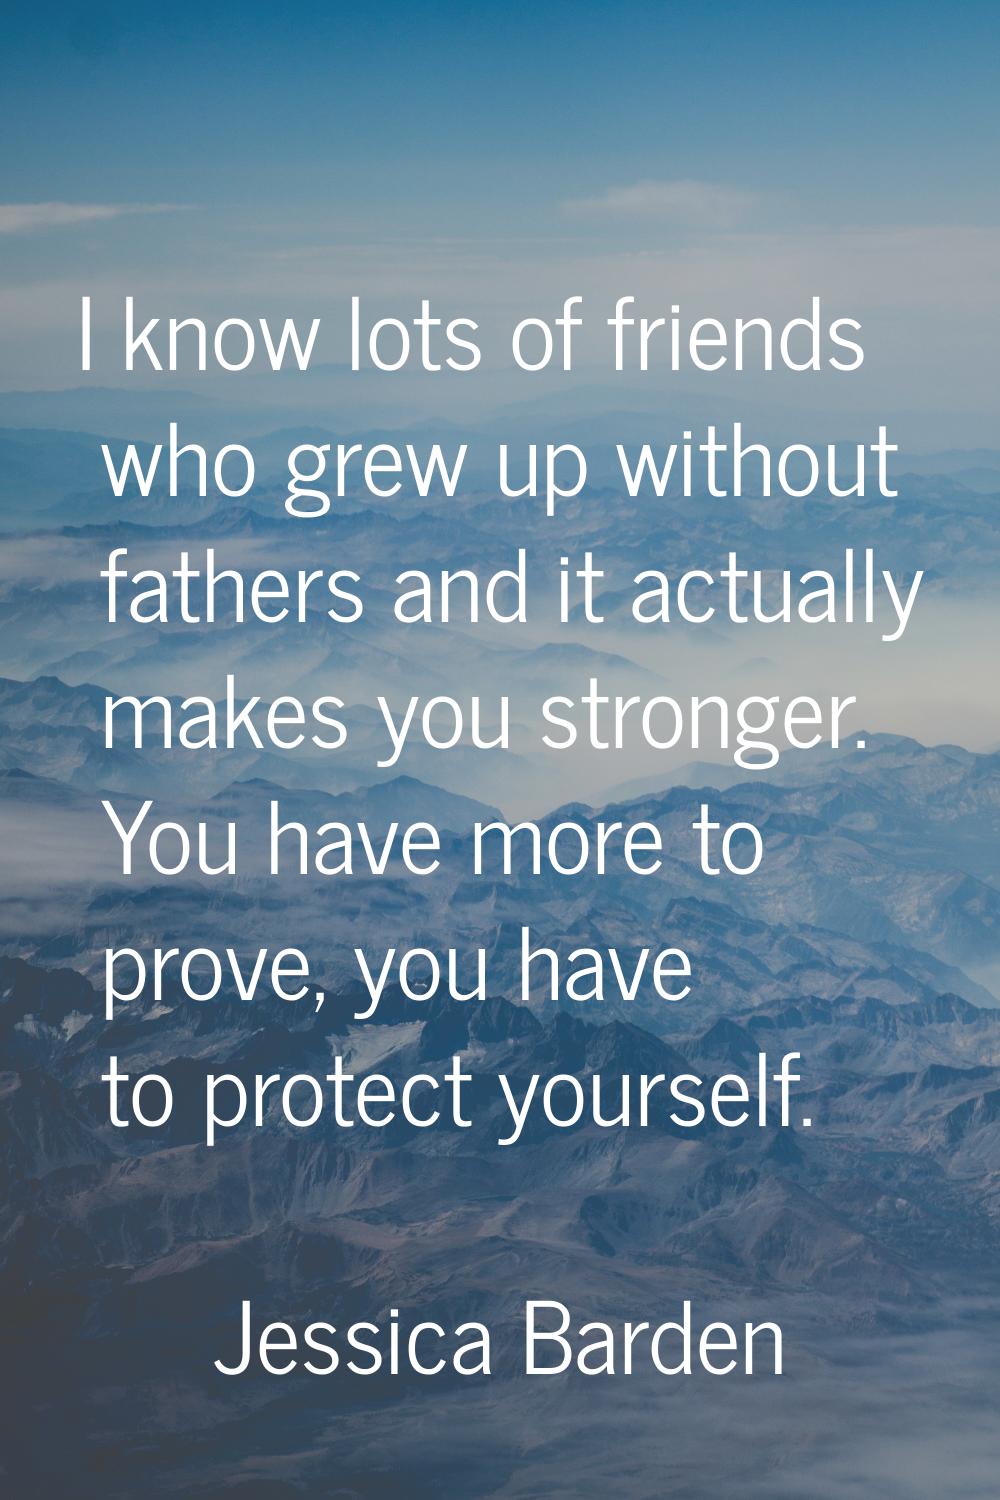 I know lots of friends who grew up without fathers and it actually makes you stronger. You have mor